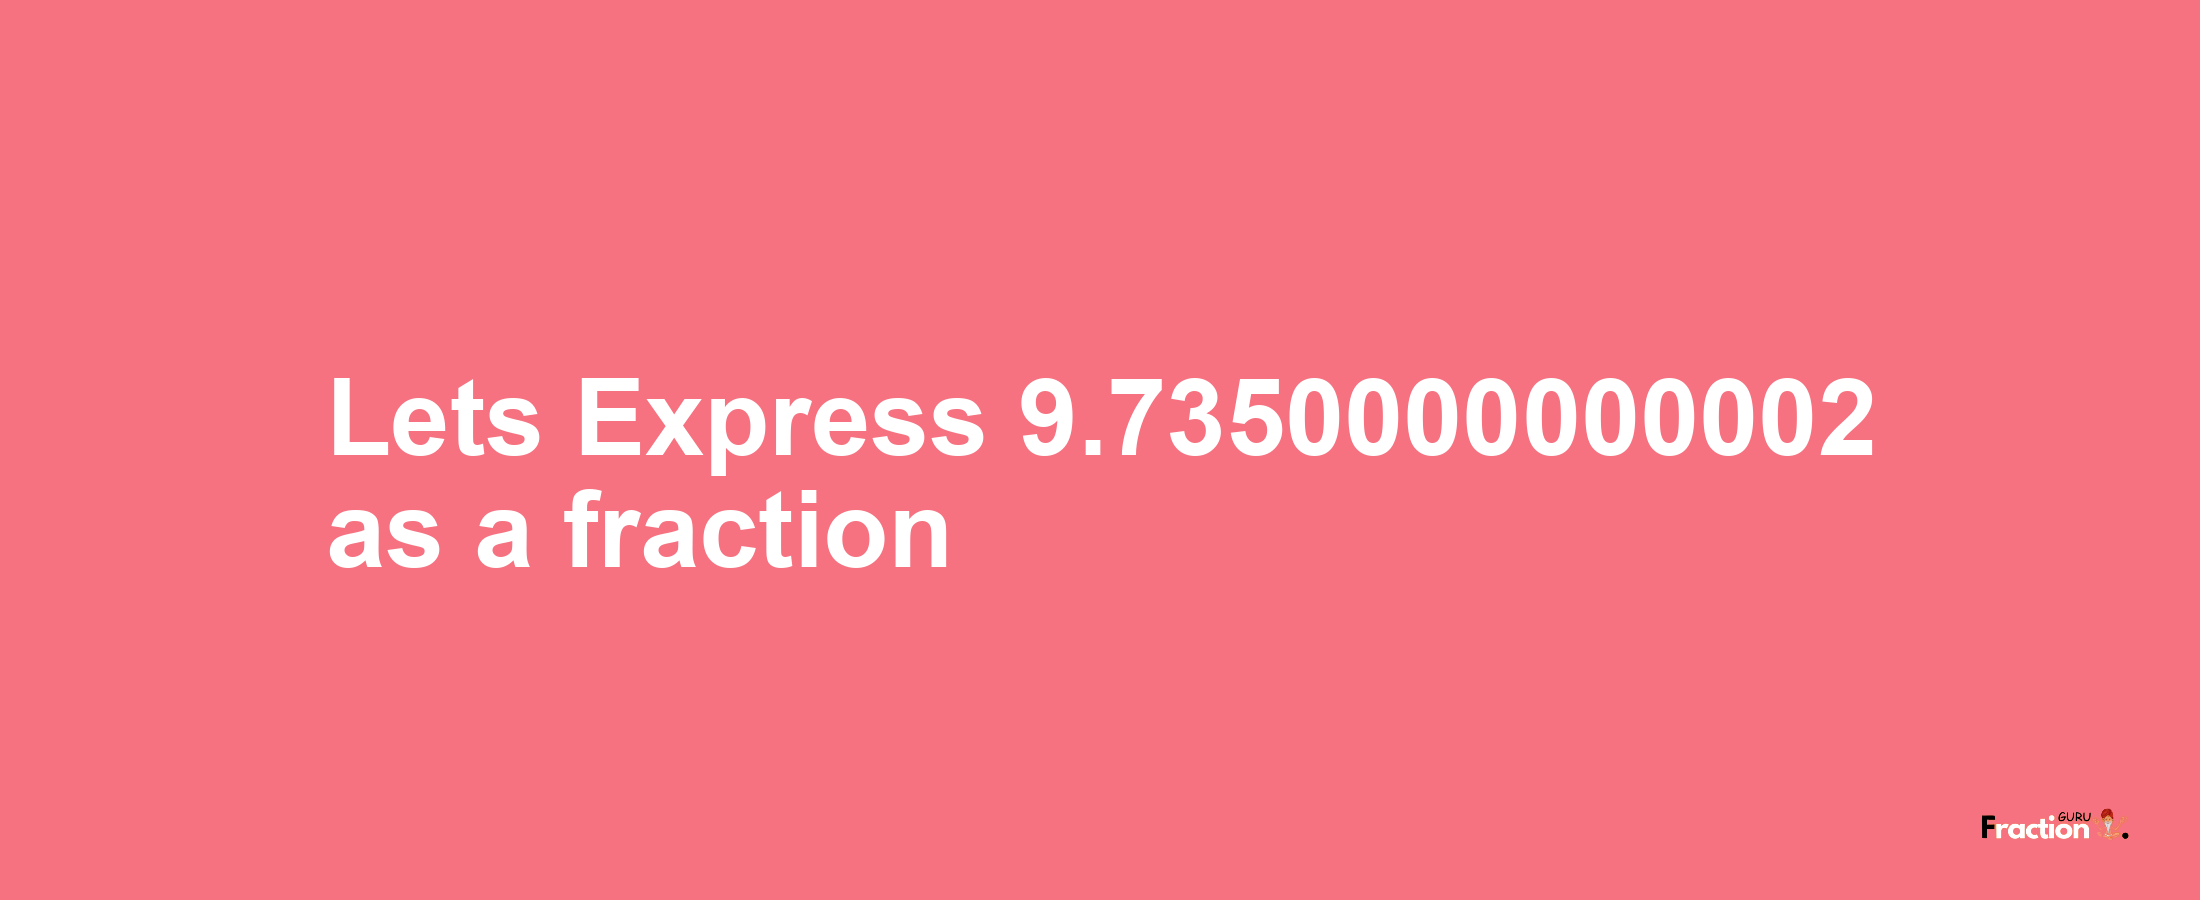 Lets Express 9.7350000000002 as afraction